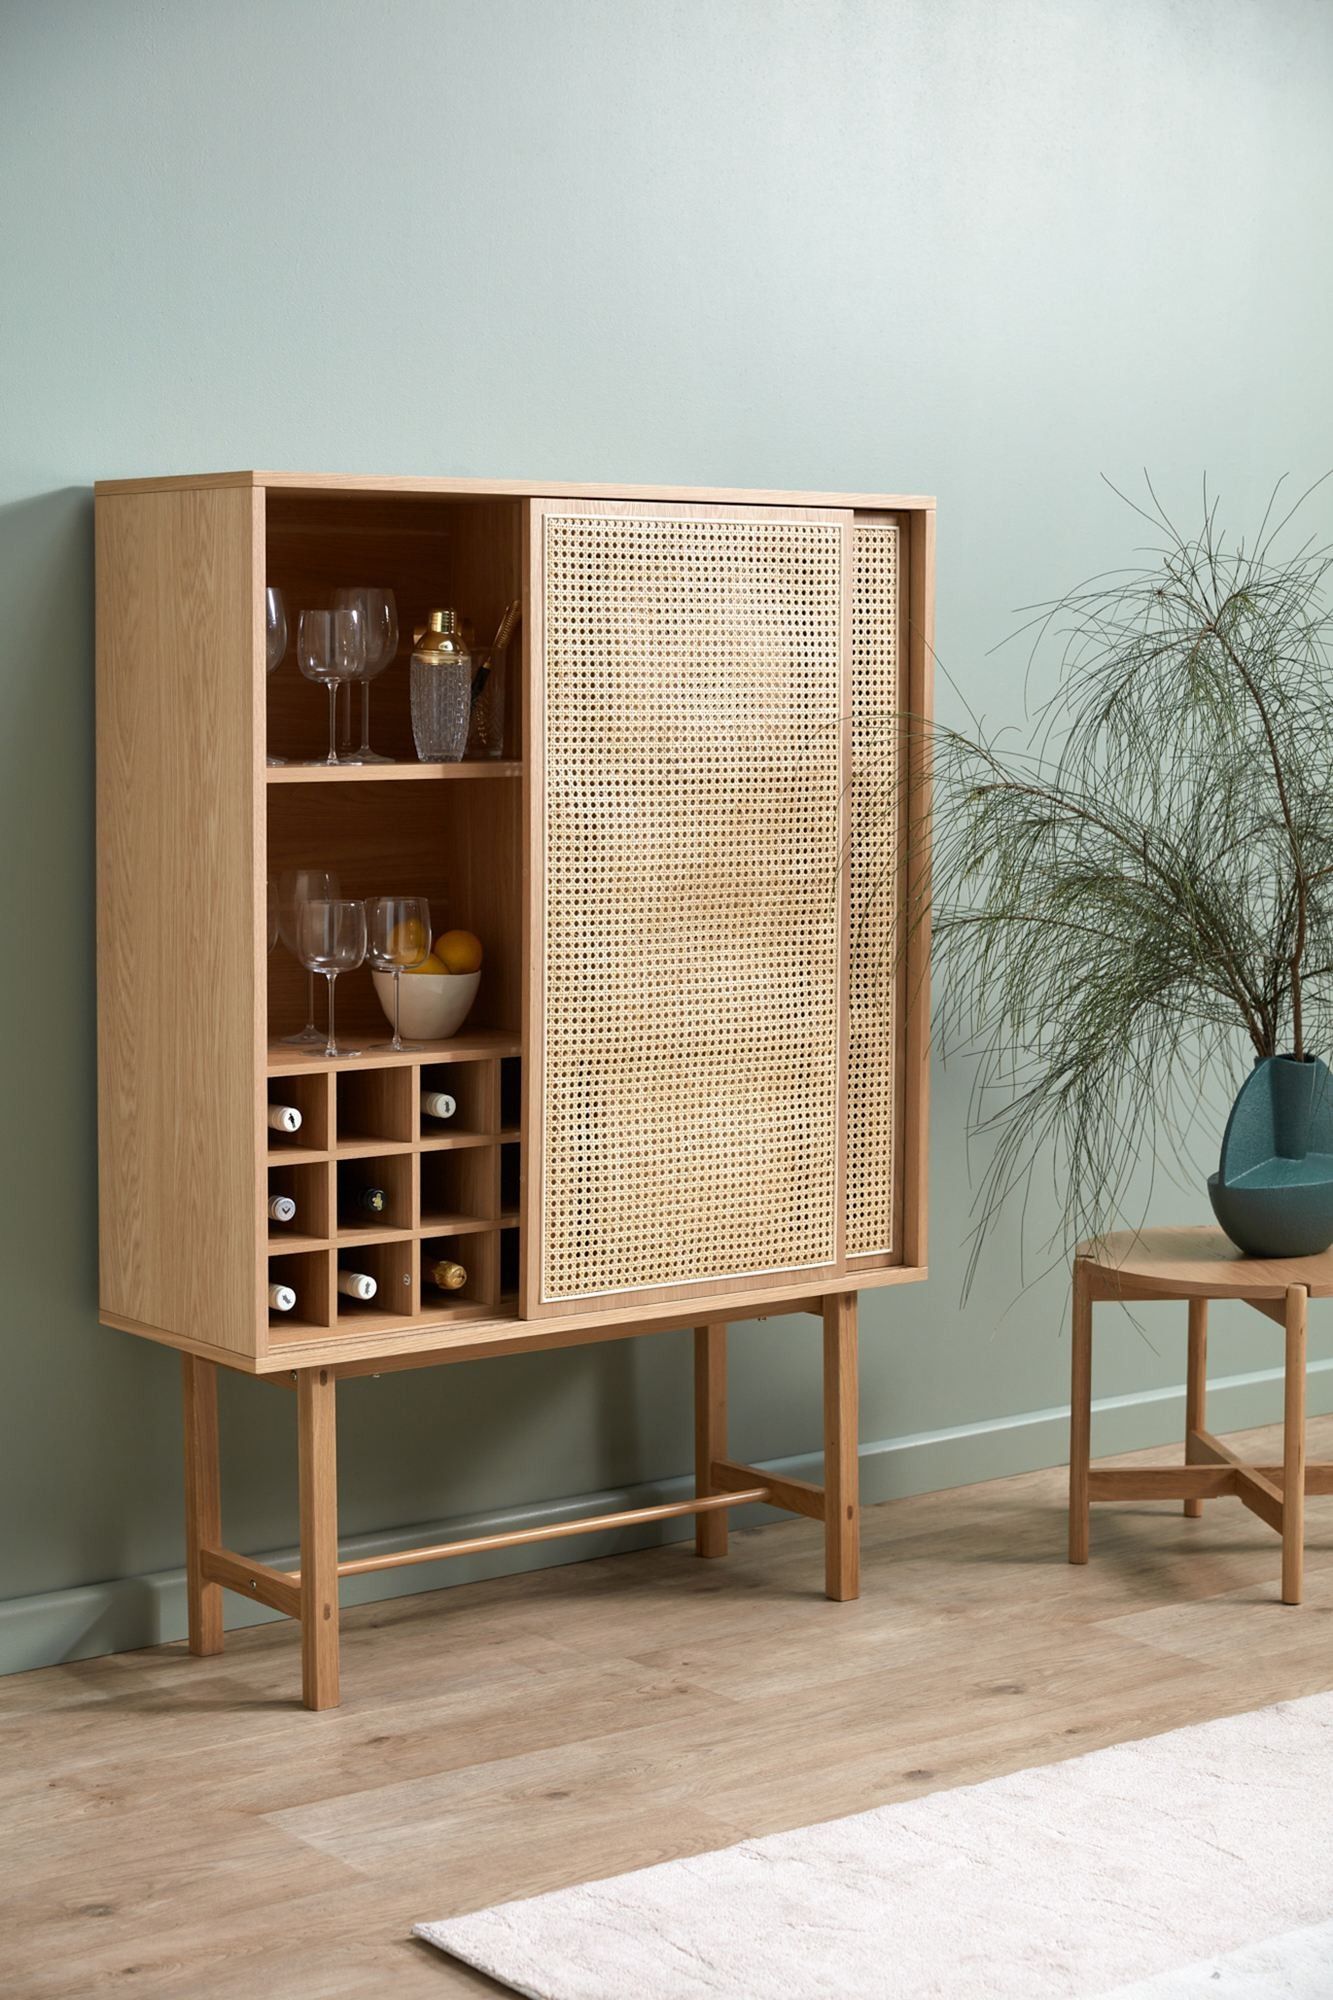 Stylish Small Bar Cabinet for Your Home Decor